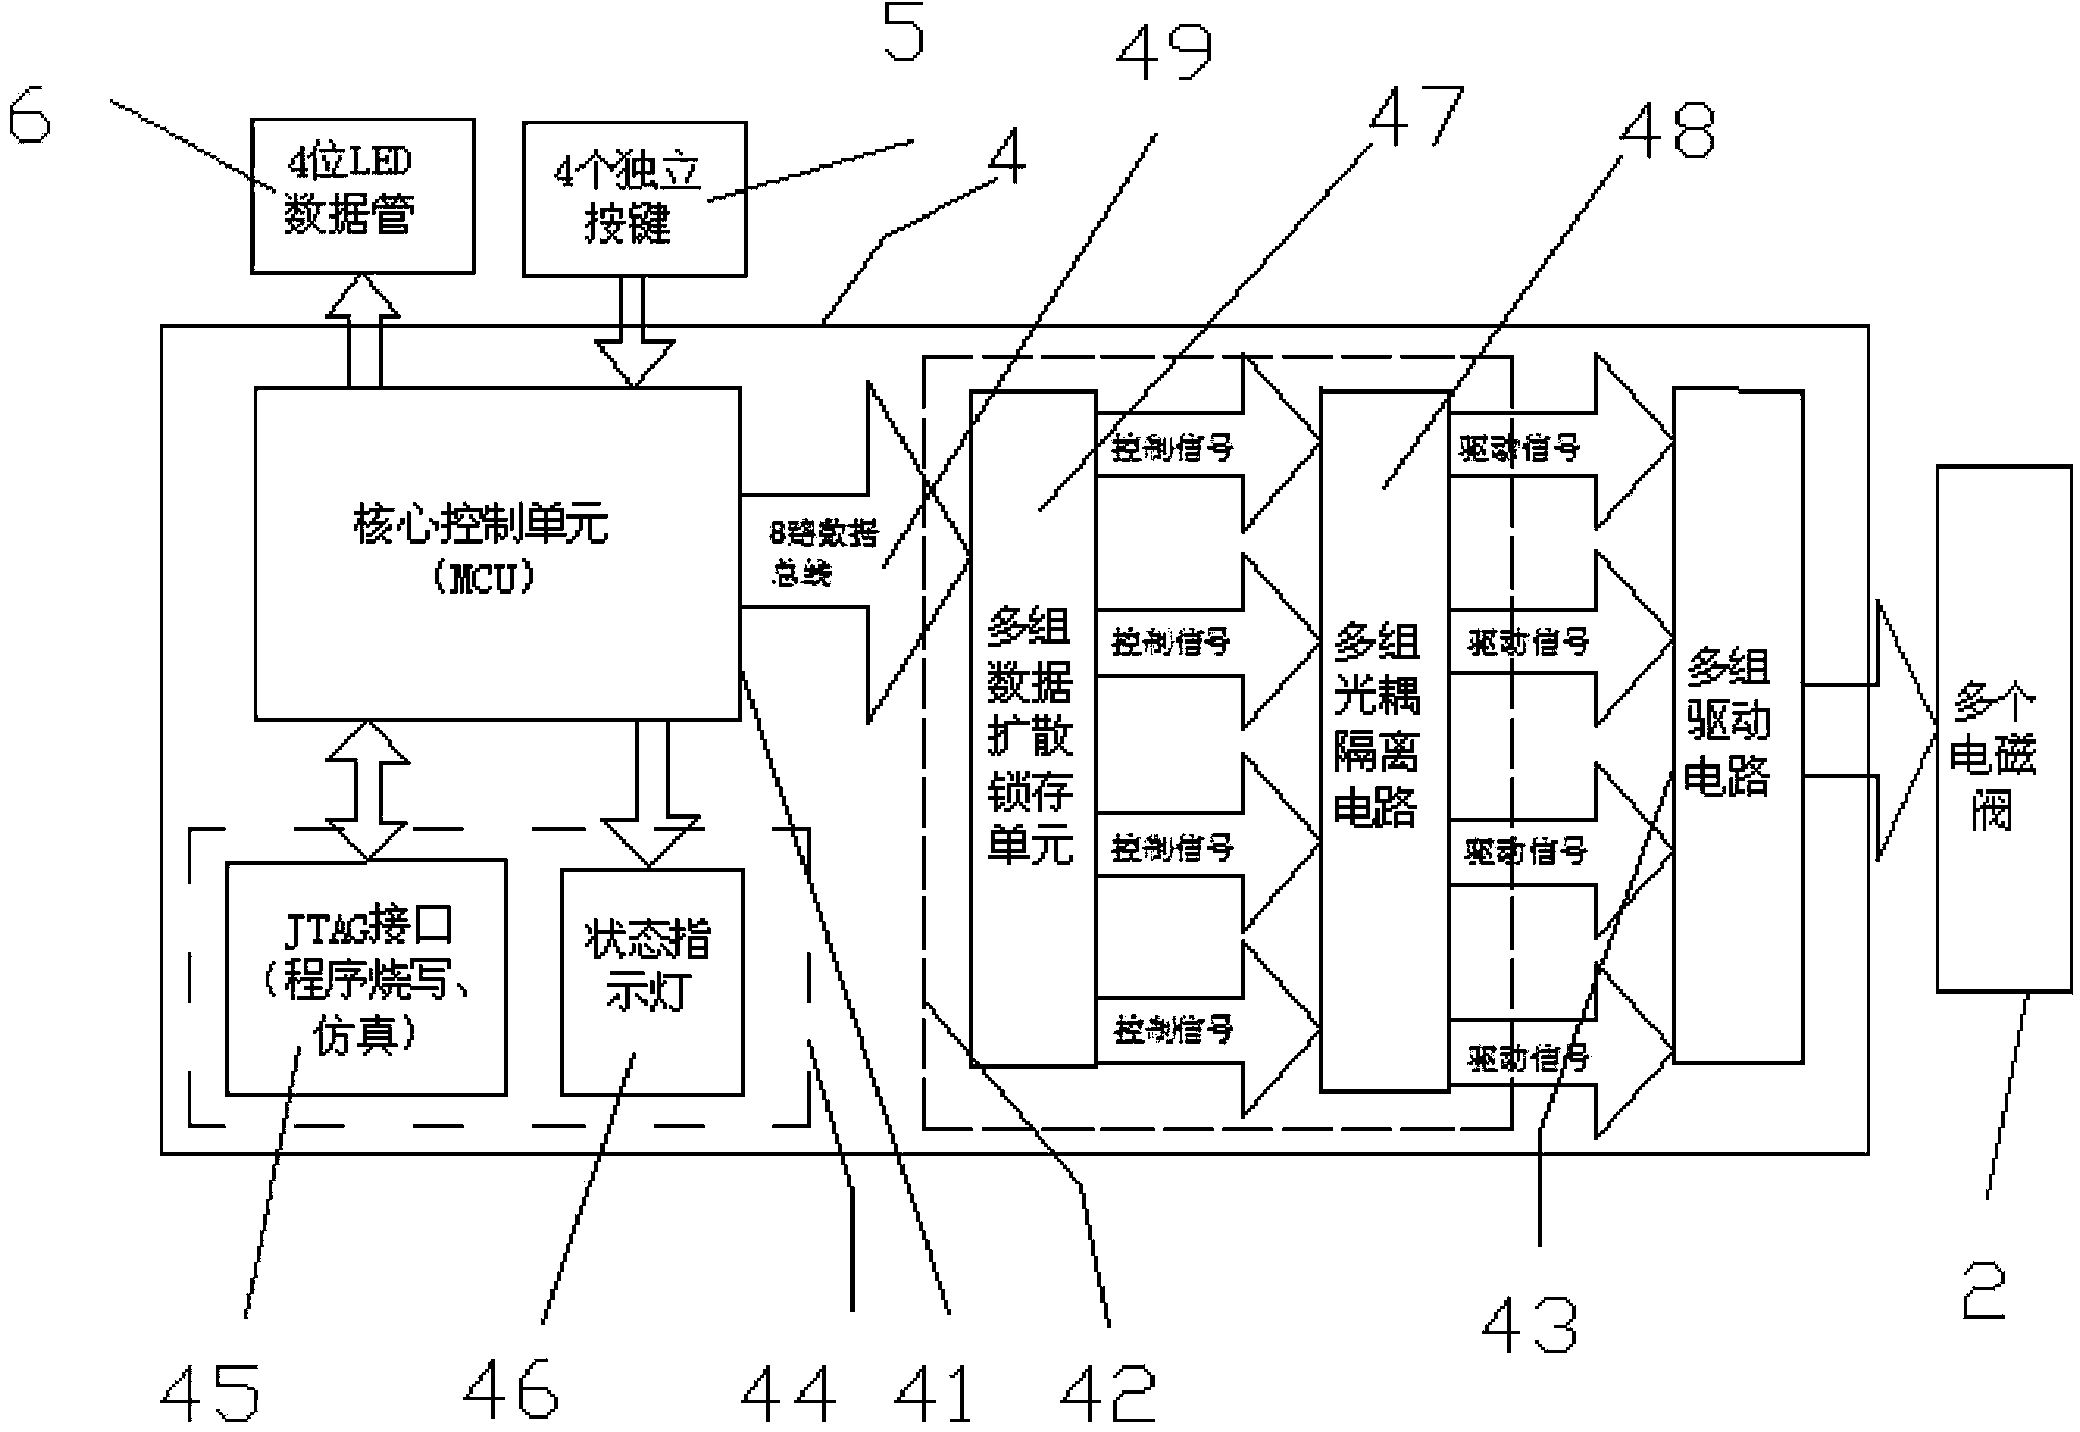 Automatic multiplex solenoid valve two-state energy-saving display platform and control method thereof